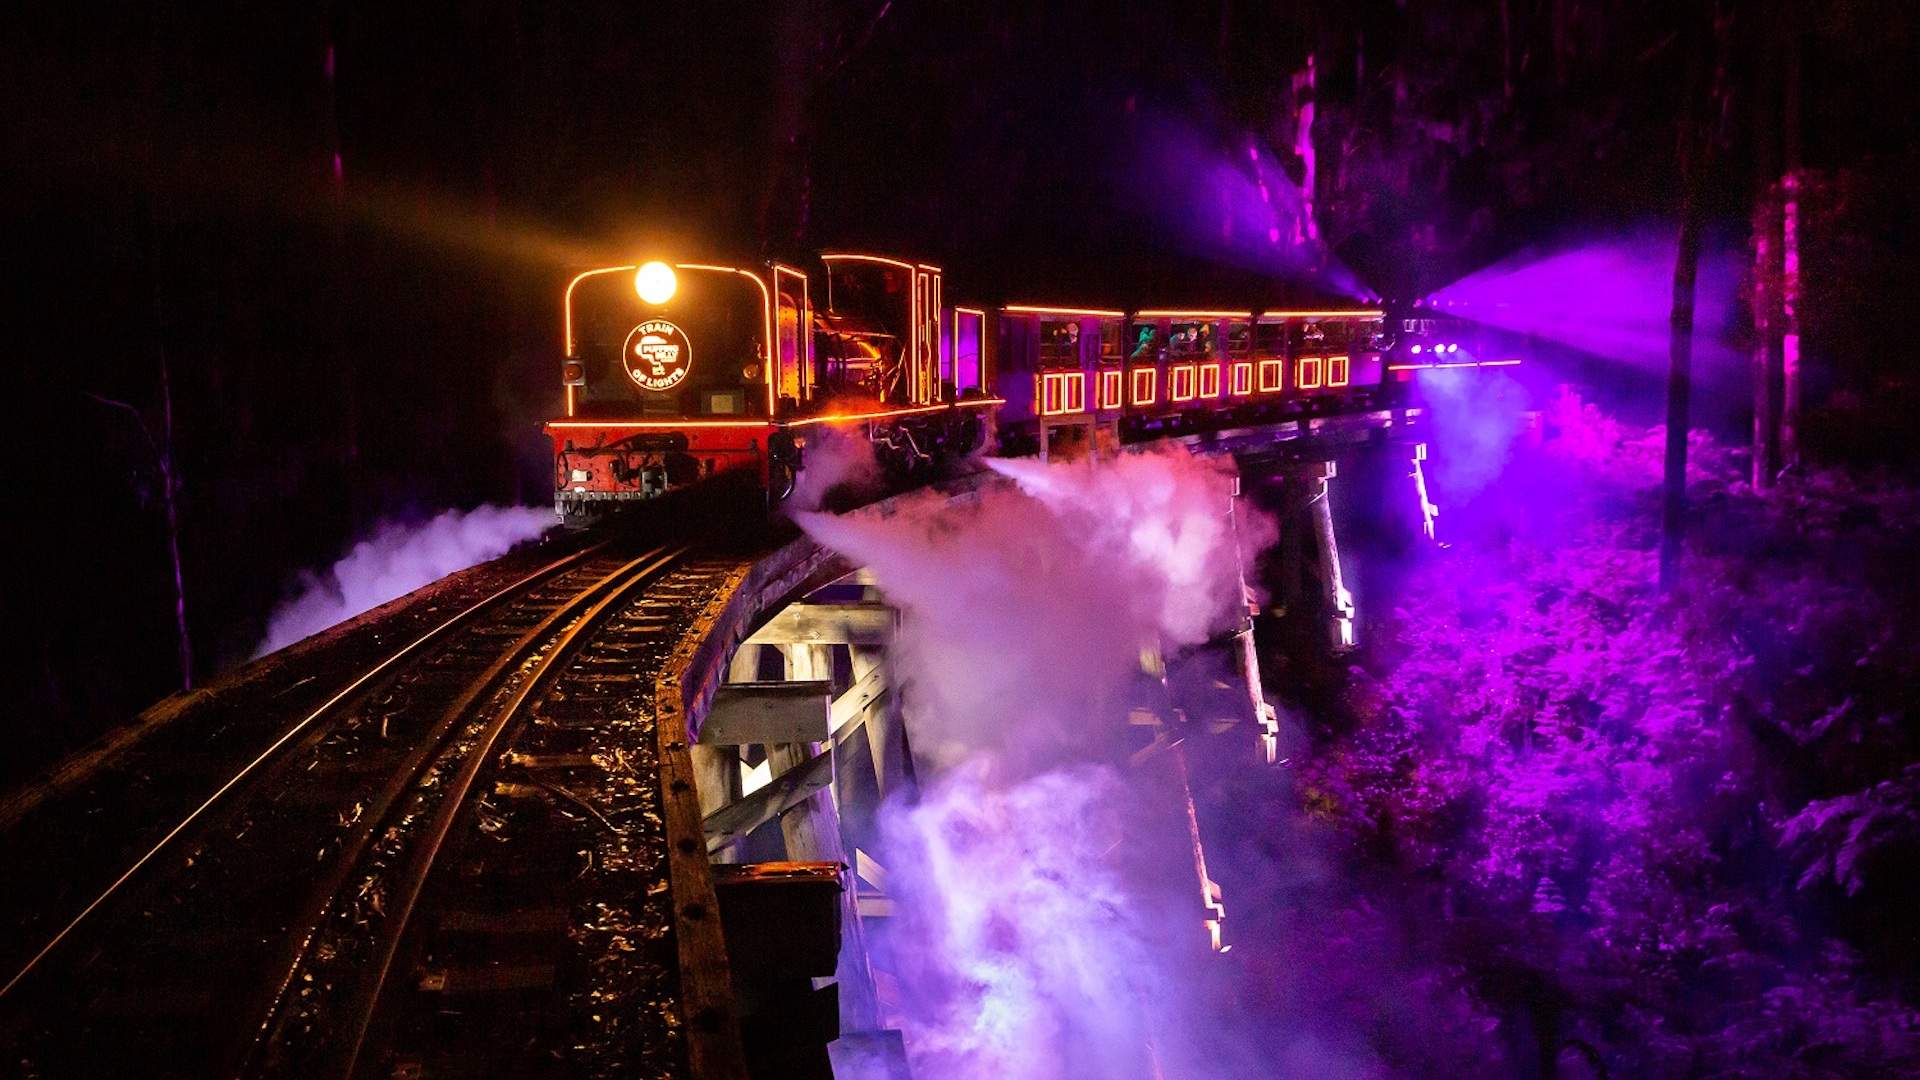 All Aboard: Puffing Billy Is Getting Transformed with Another Immersive Light Experience